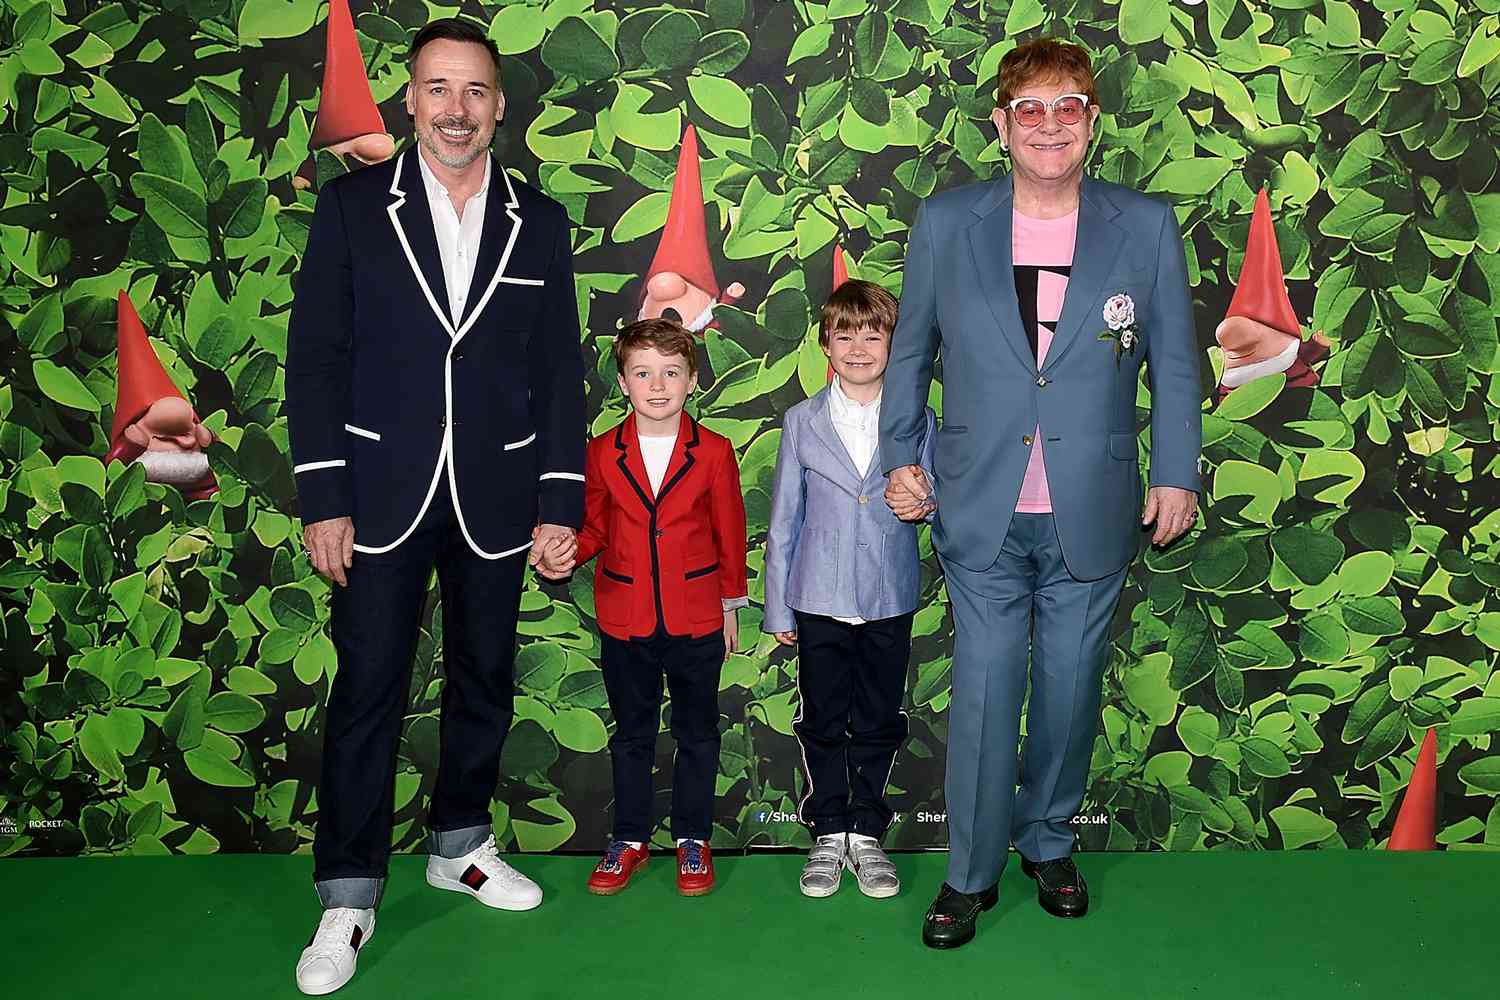 David Furnish (L) and Elton John with sons Elijah and Zachary attending the 'Sherlock Gnomes' London Family Gala hosted by Sir Elton John and David Furnish at Cineworld Leicester Square on April 22, 2018